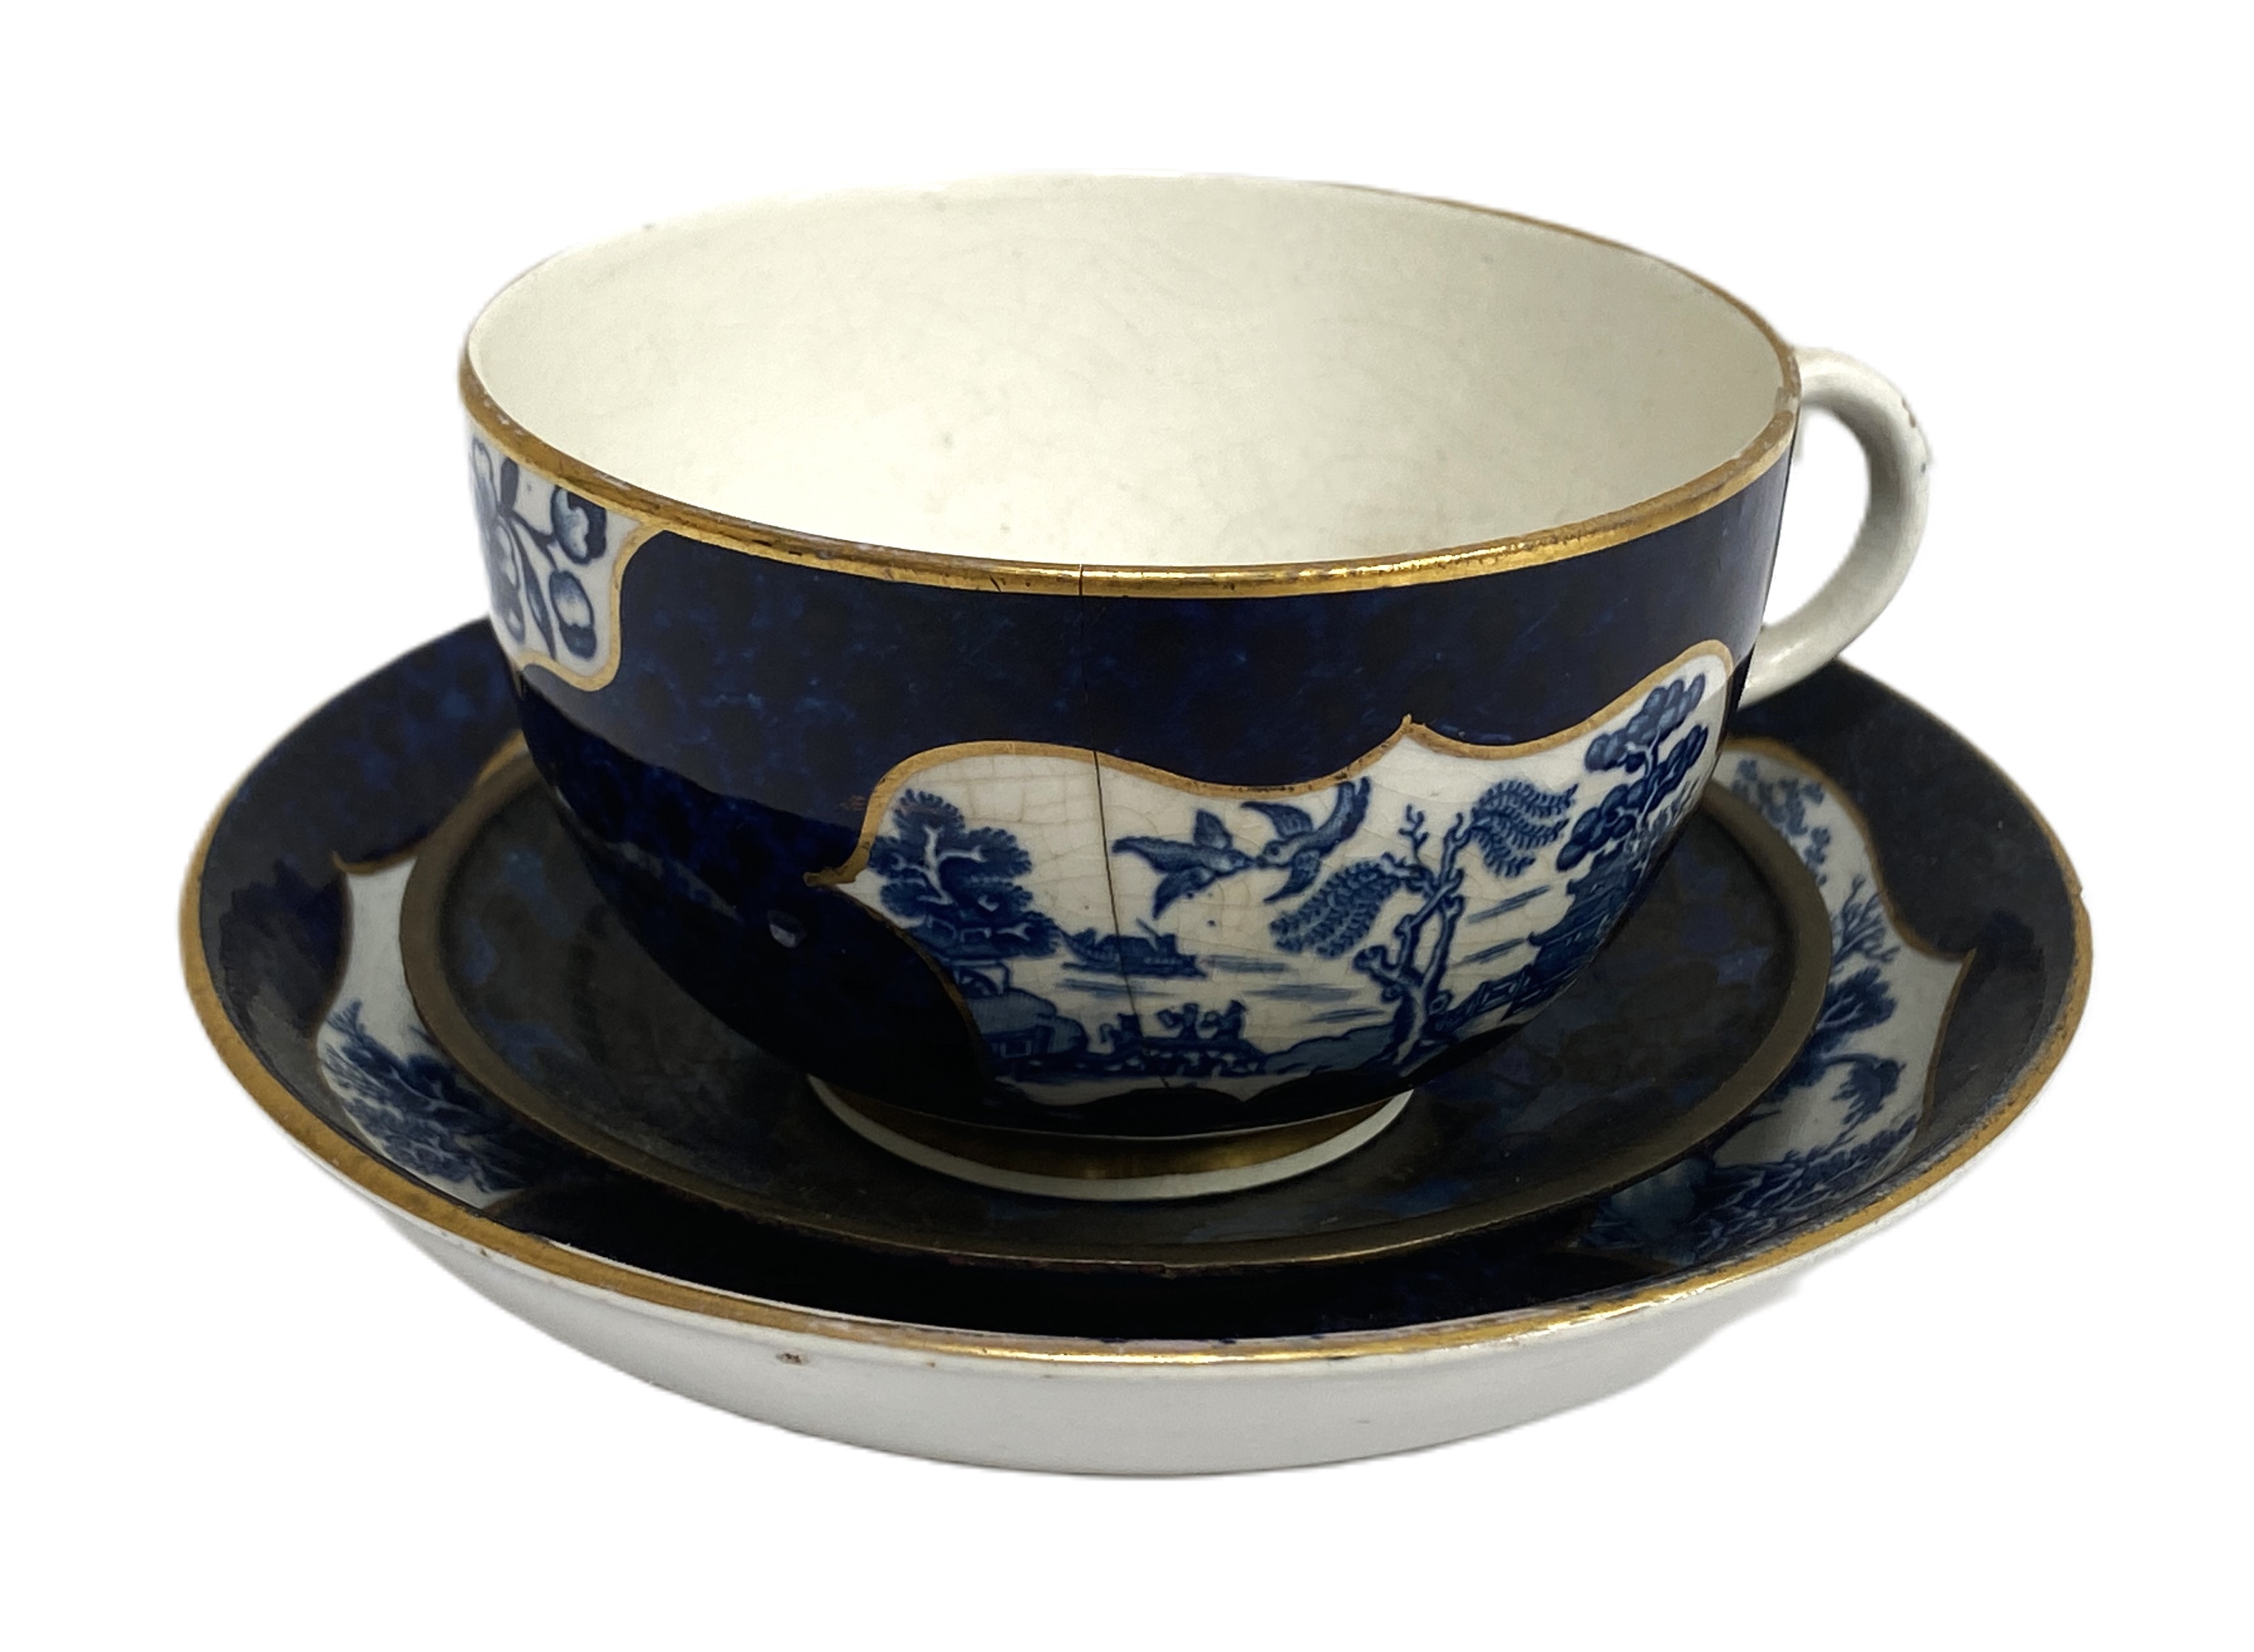 A Wedgewood bone china tea service, decorated with gilt, flowers and motifs on a white ground and - Image 7 of 7